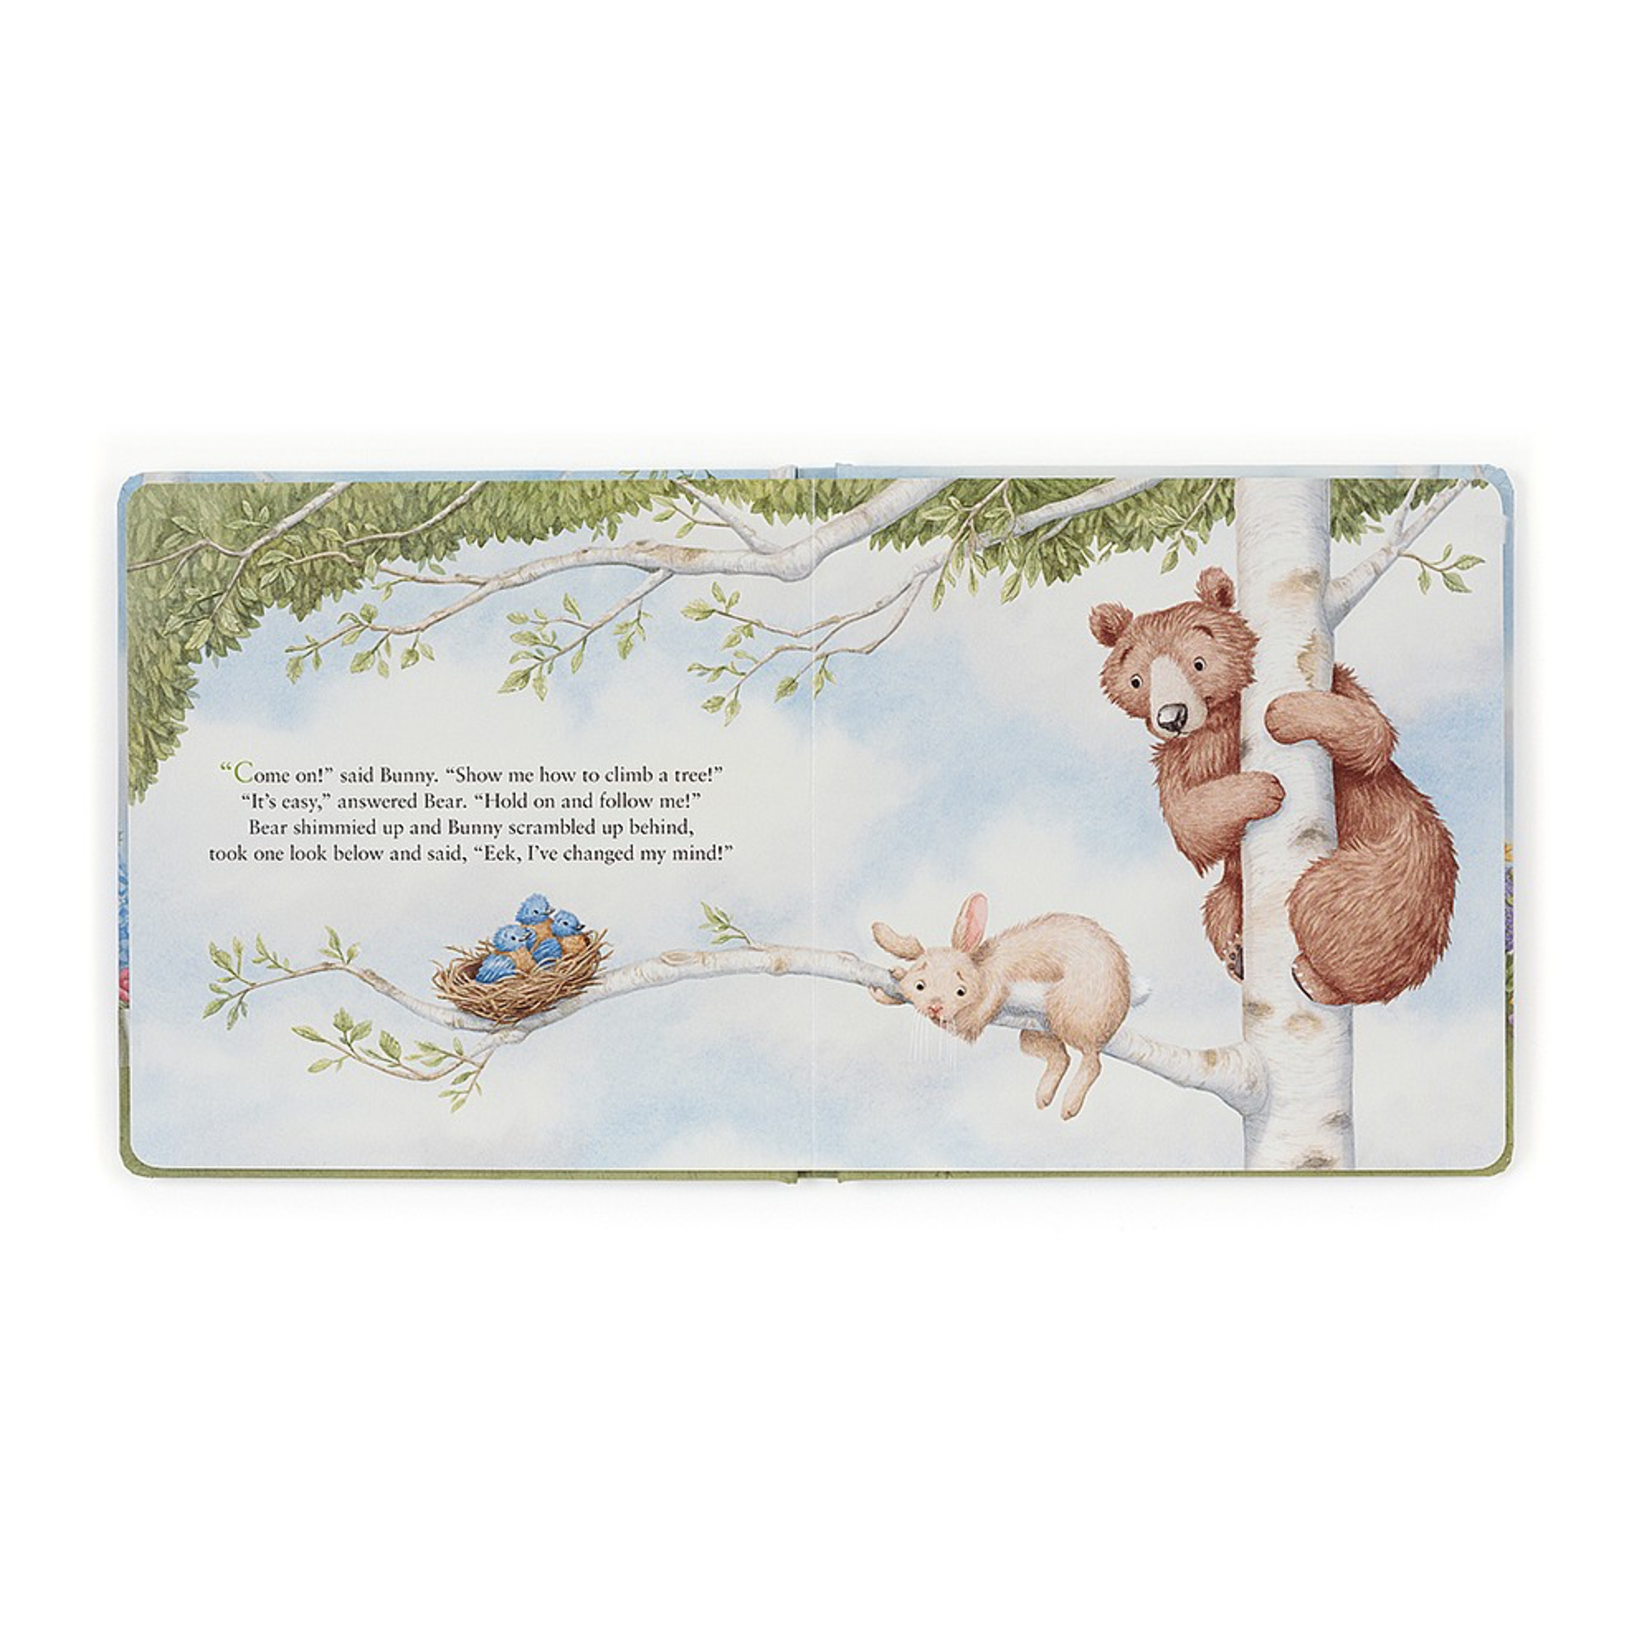 Jellycat - Soft Book Jellycat - If I Were YOU & You Were ME Storybook